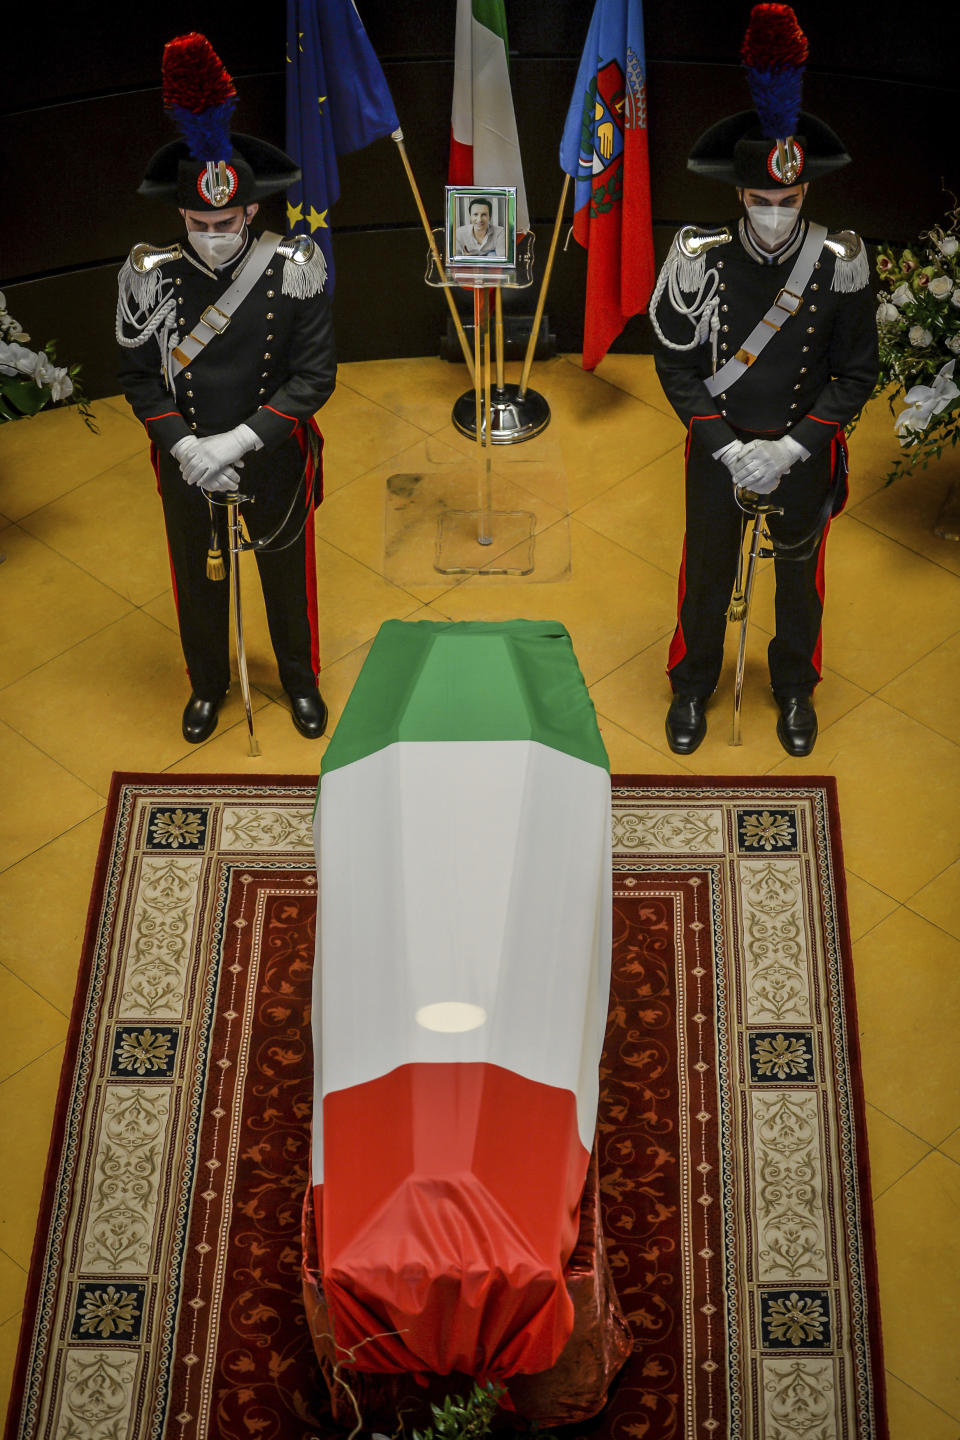 Carabinieri officers stand by the coffin of Italian ambassador to the Democratic Republic of Congo Luca Attanasio, in Limbiate, near Milan, Italy, Friday, Feb. 26, 2021. Italy paid tribute to its ambassador to Congo and his bodyguard who were killed in an attack on a U.N. convoy, honoring them with a state funeral Thursday. (Claudio Furlan/LaPresse via AP)